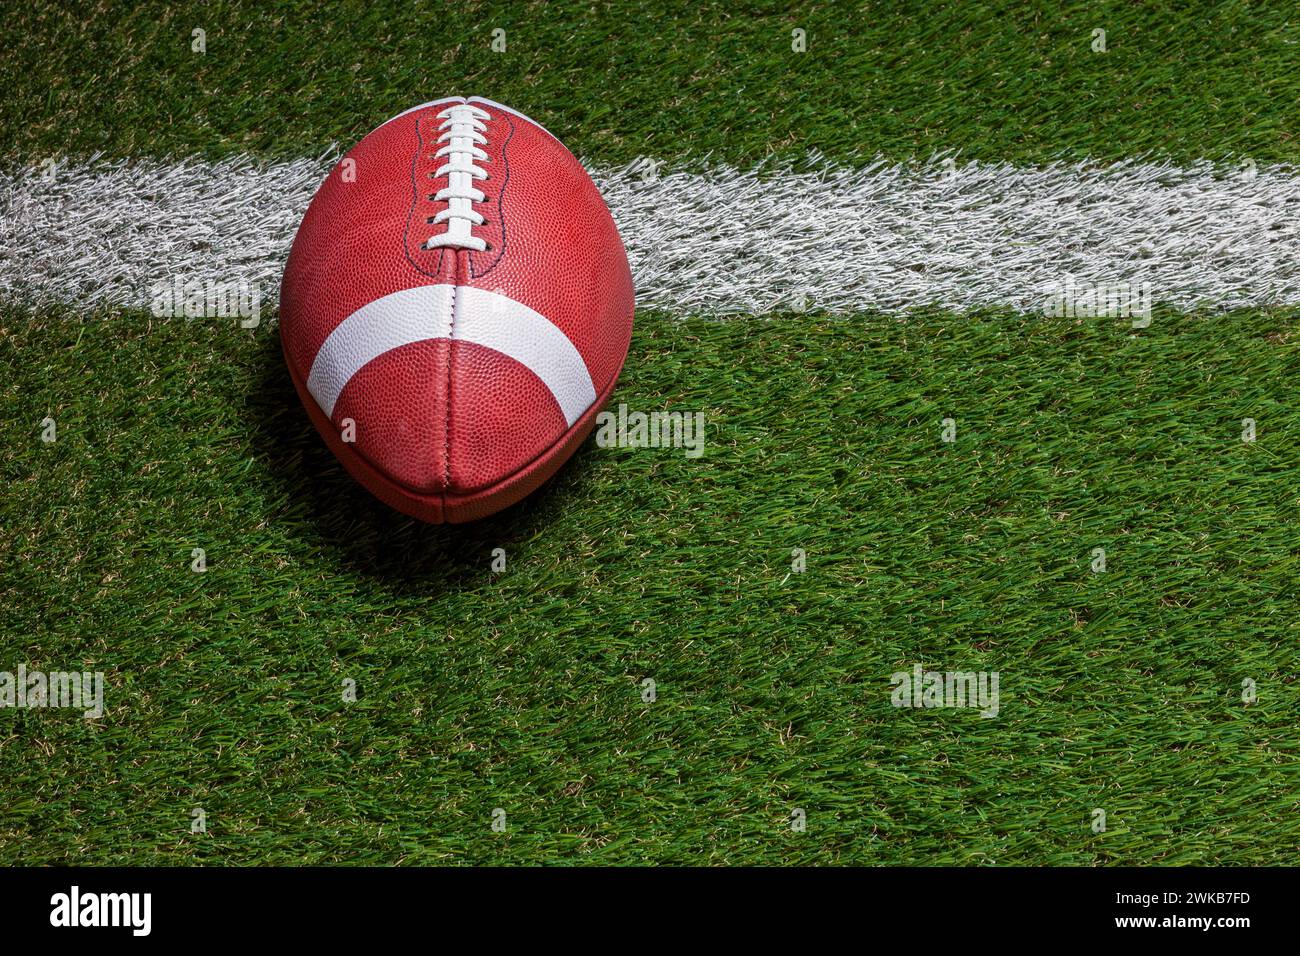 Football at the goal line on a grass field high angle view Stock Photo